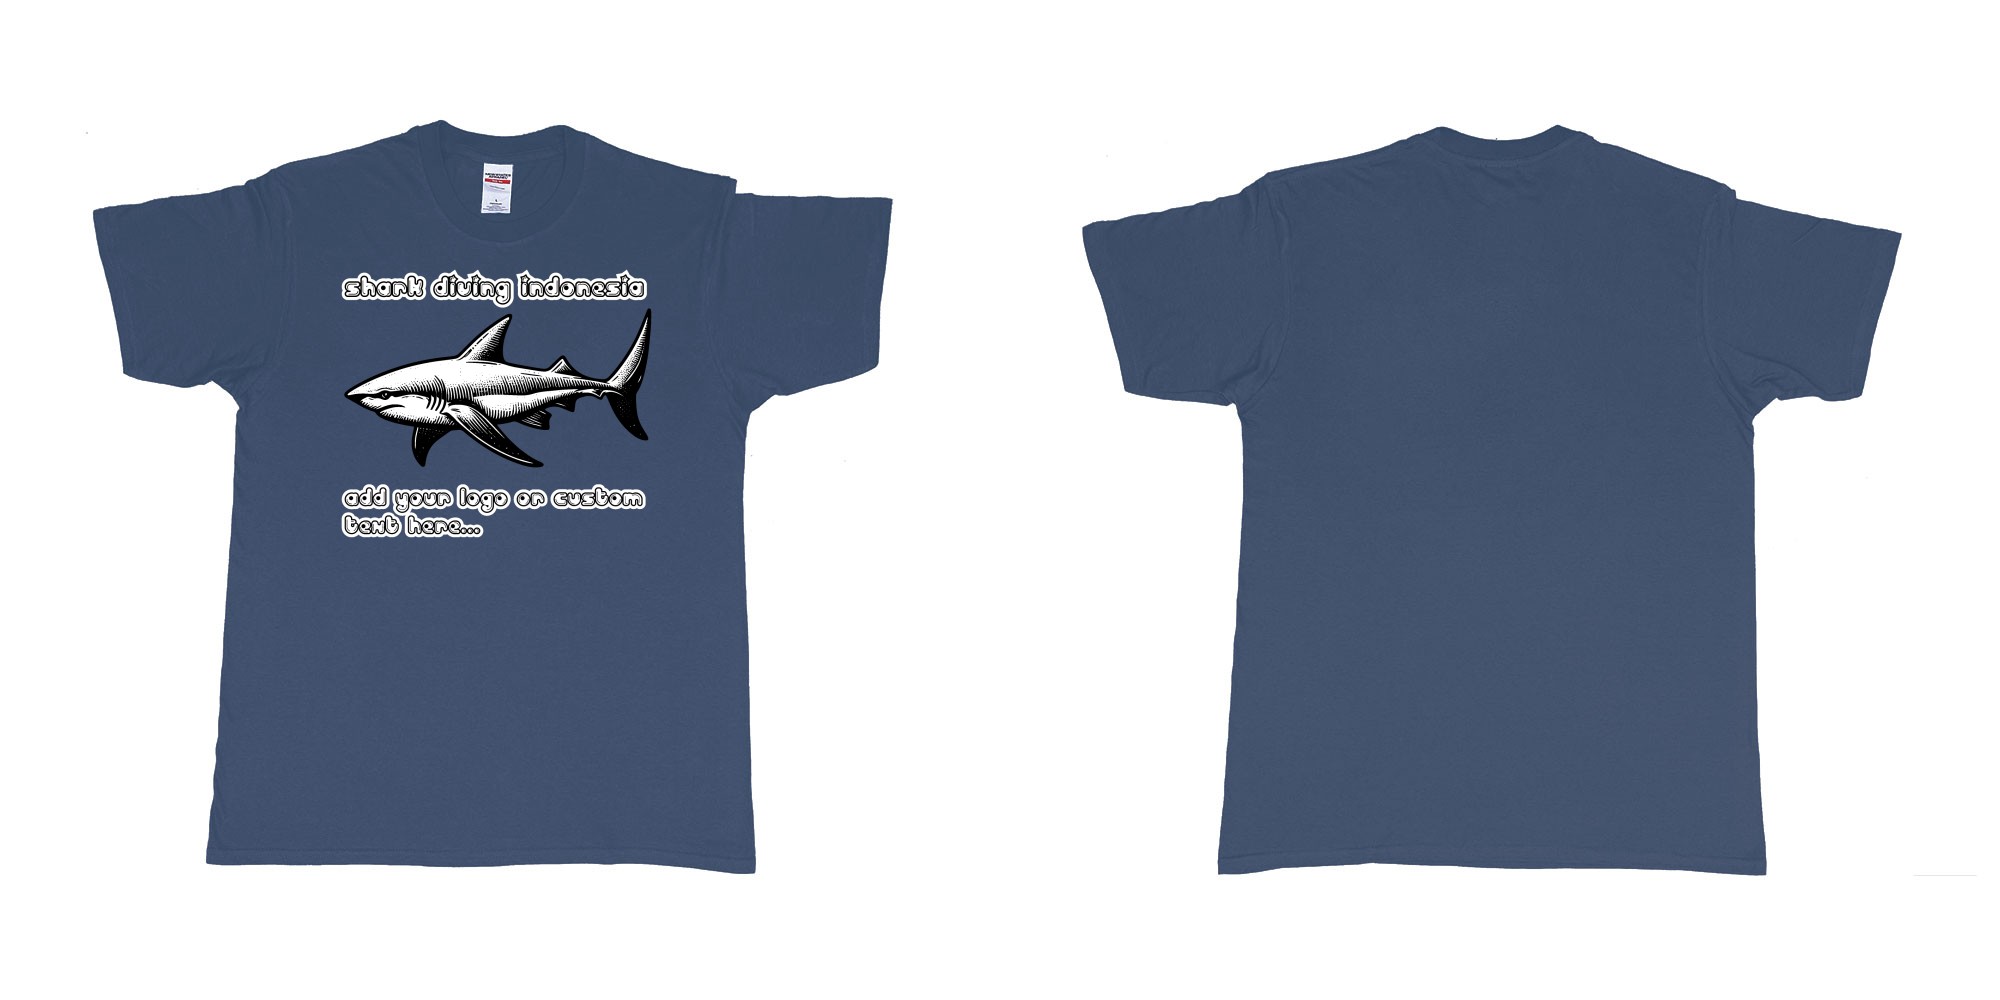 Custom tshirt design shark diving indonesia add own logo text tshirt print in fabric color navy choice your own text made in Bali by The Pirate Way